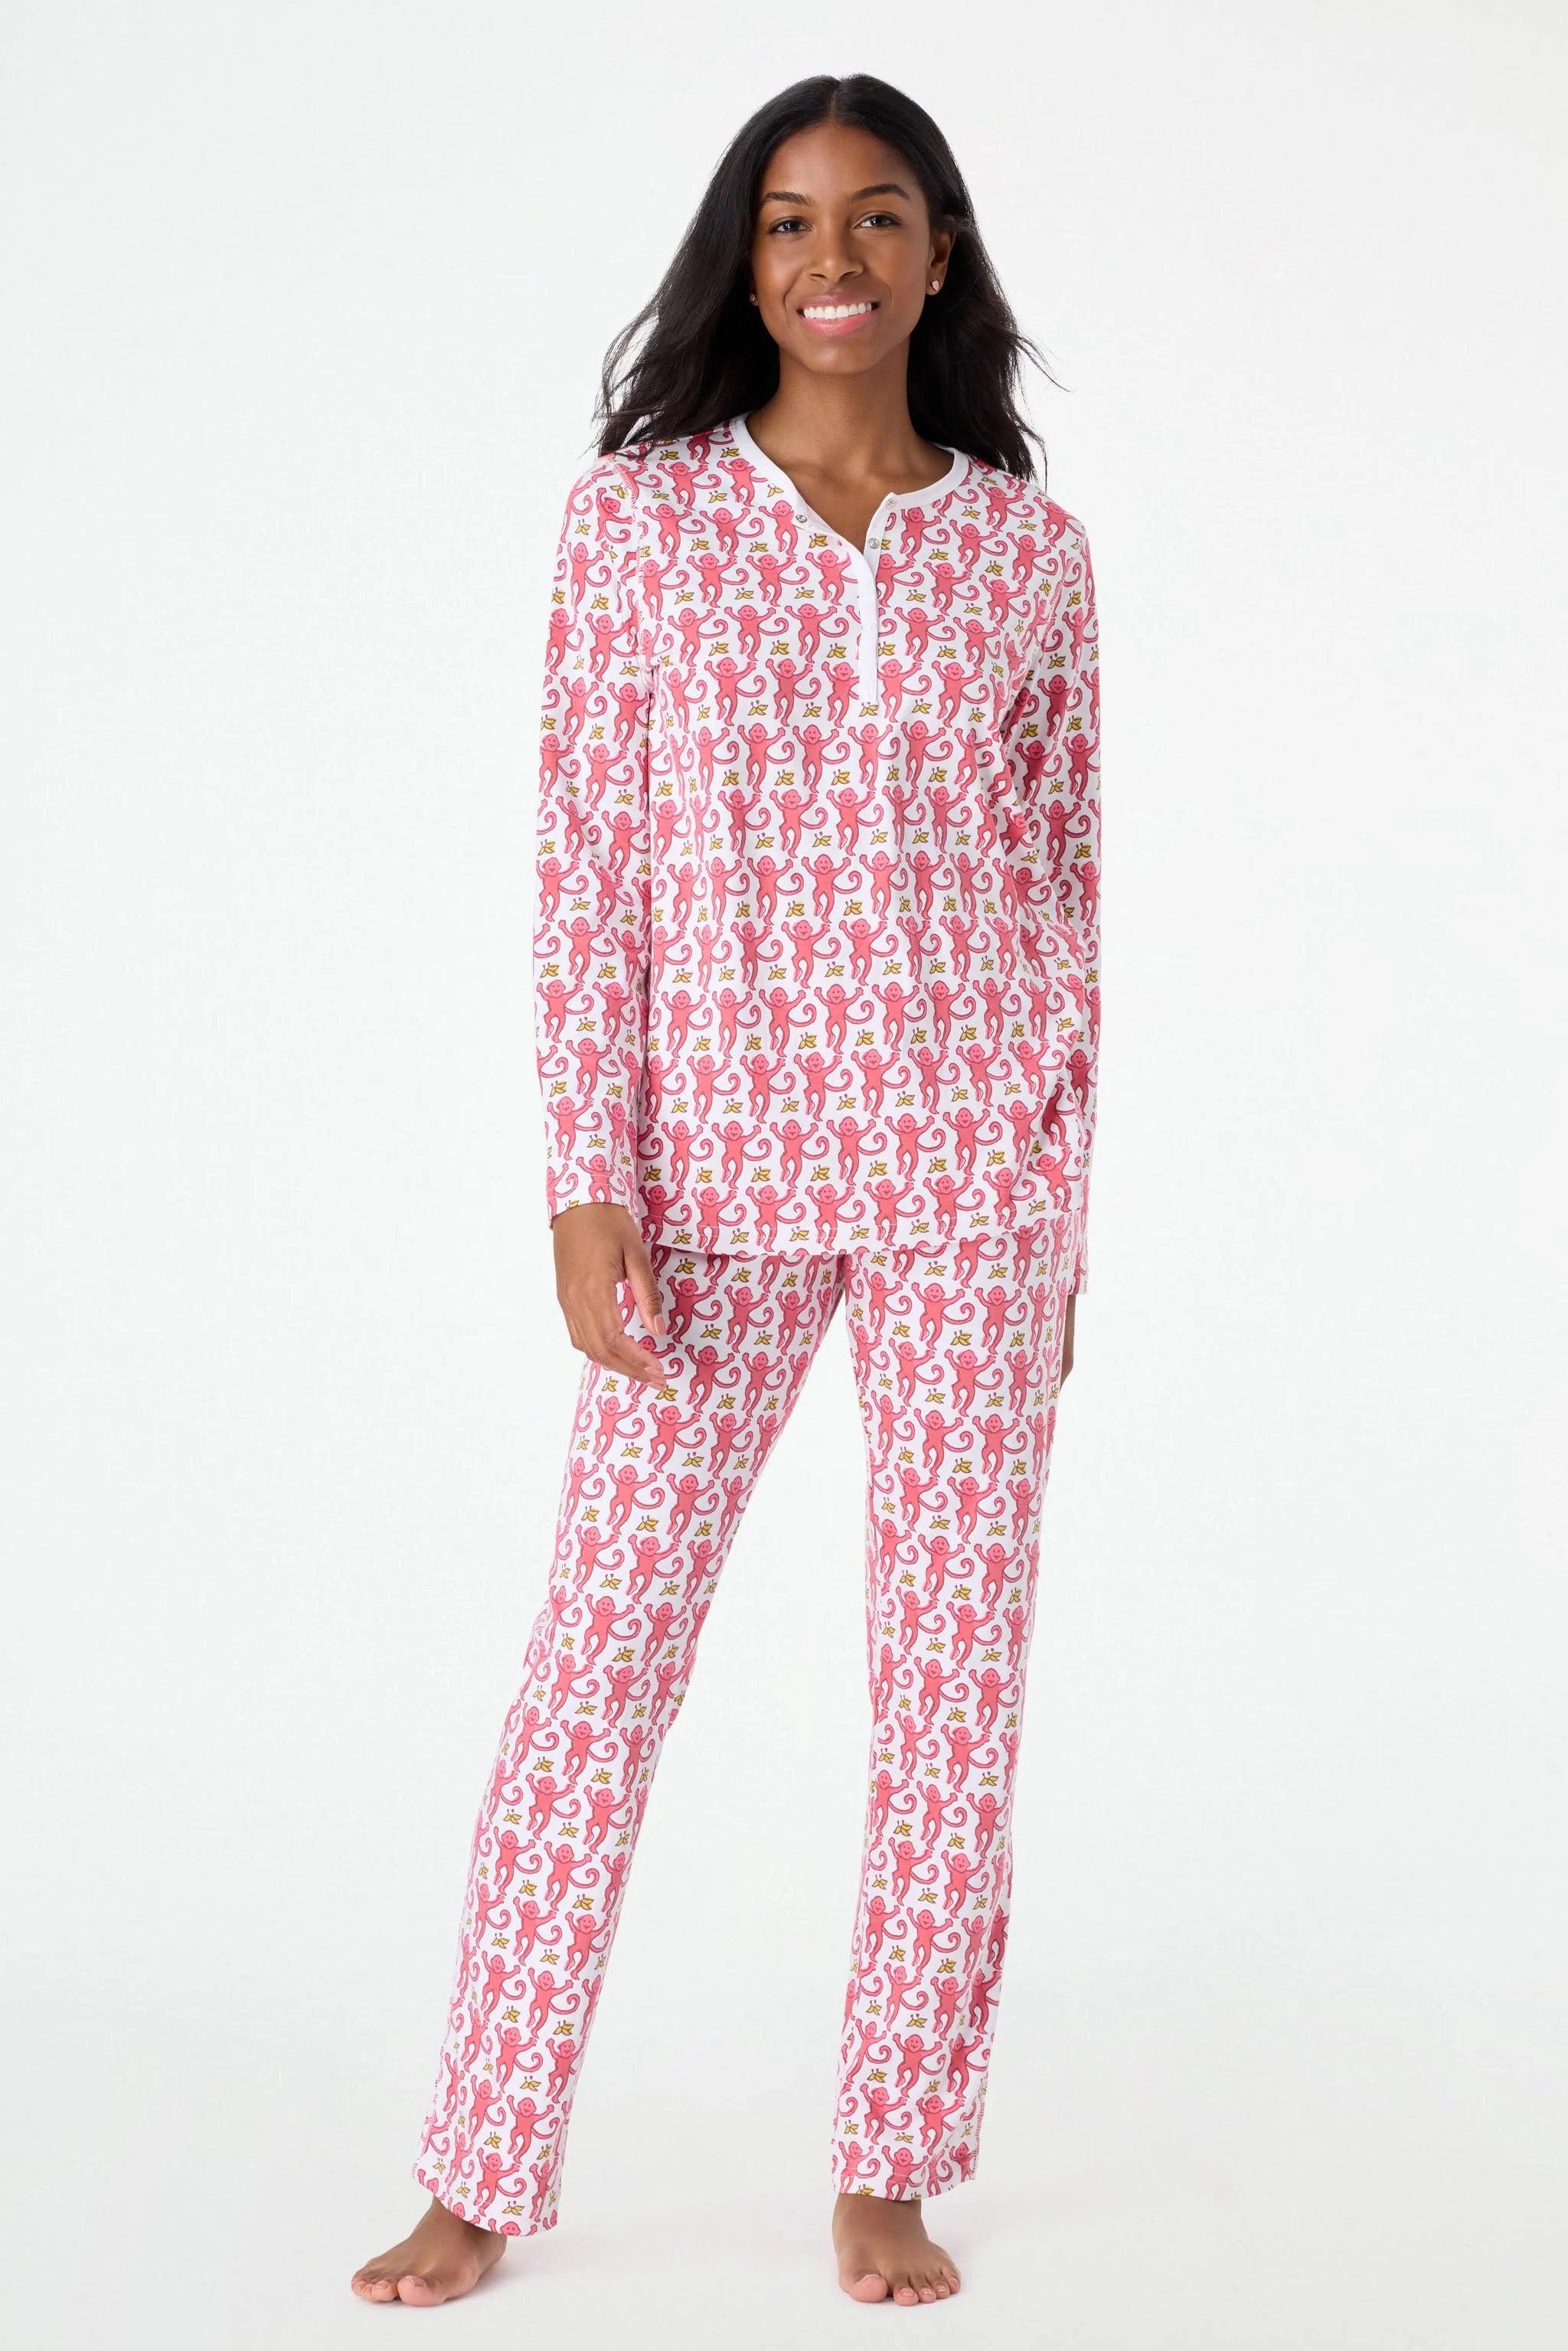 Cozy Pink Monkey Pajama Set for Girls - Perfect for Bedtime | Image